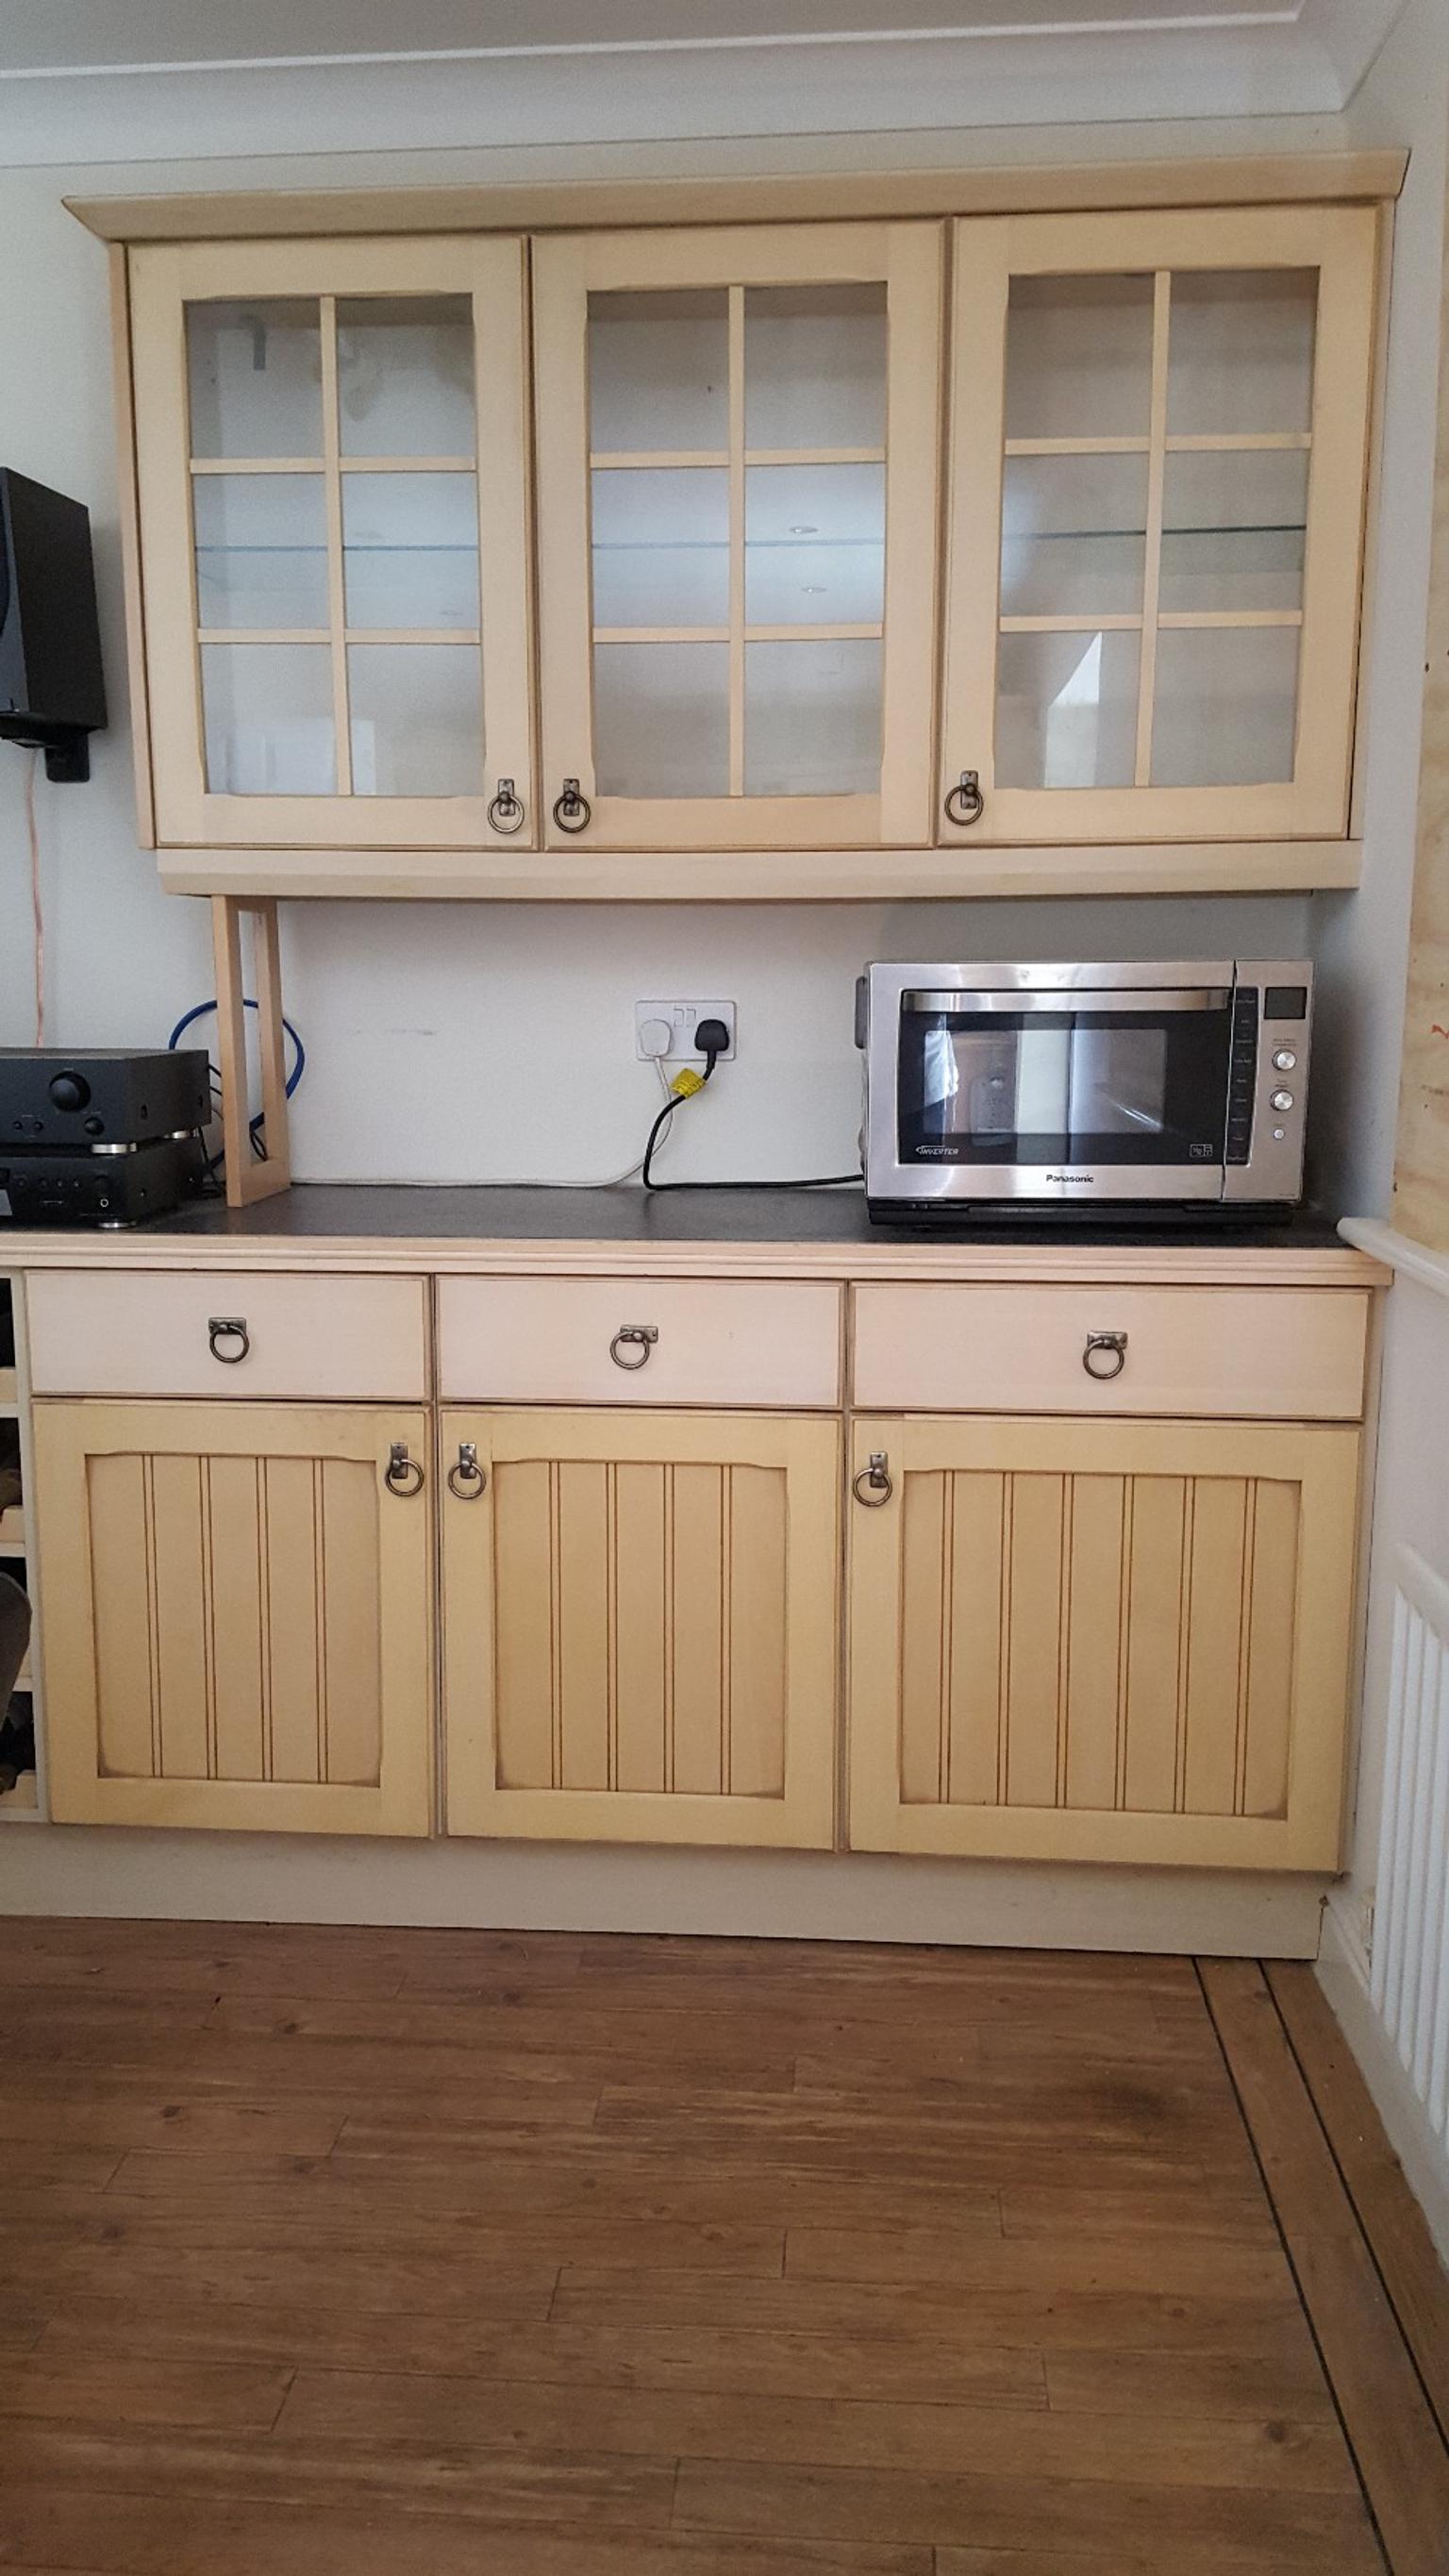 Kitchen Cabinets Units Used In CV22 Rugby For 29500 For Sale Shpock